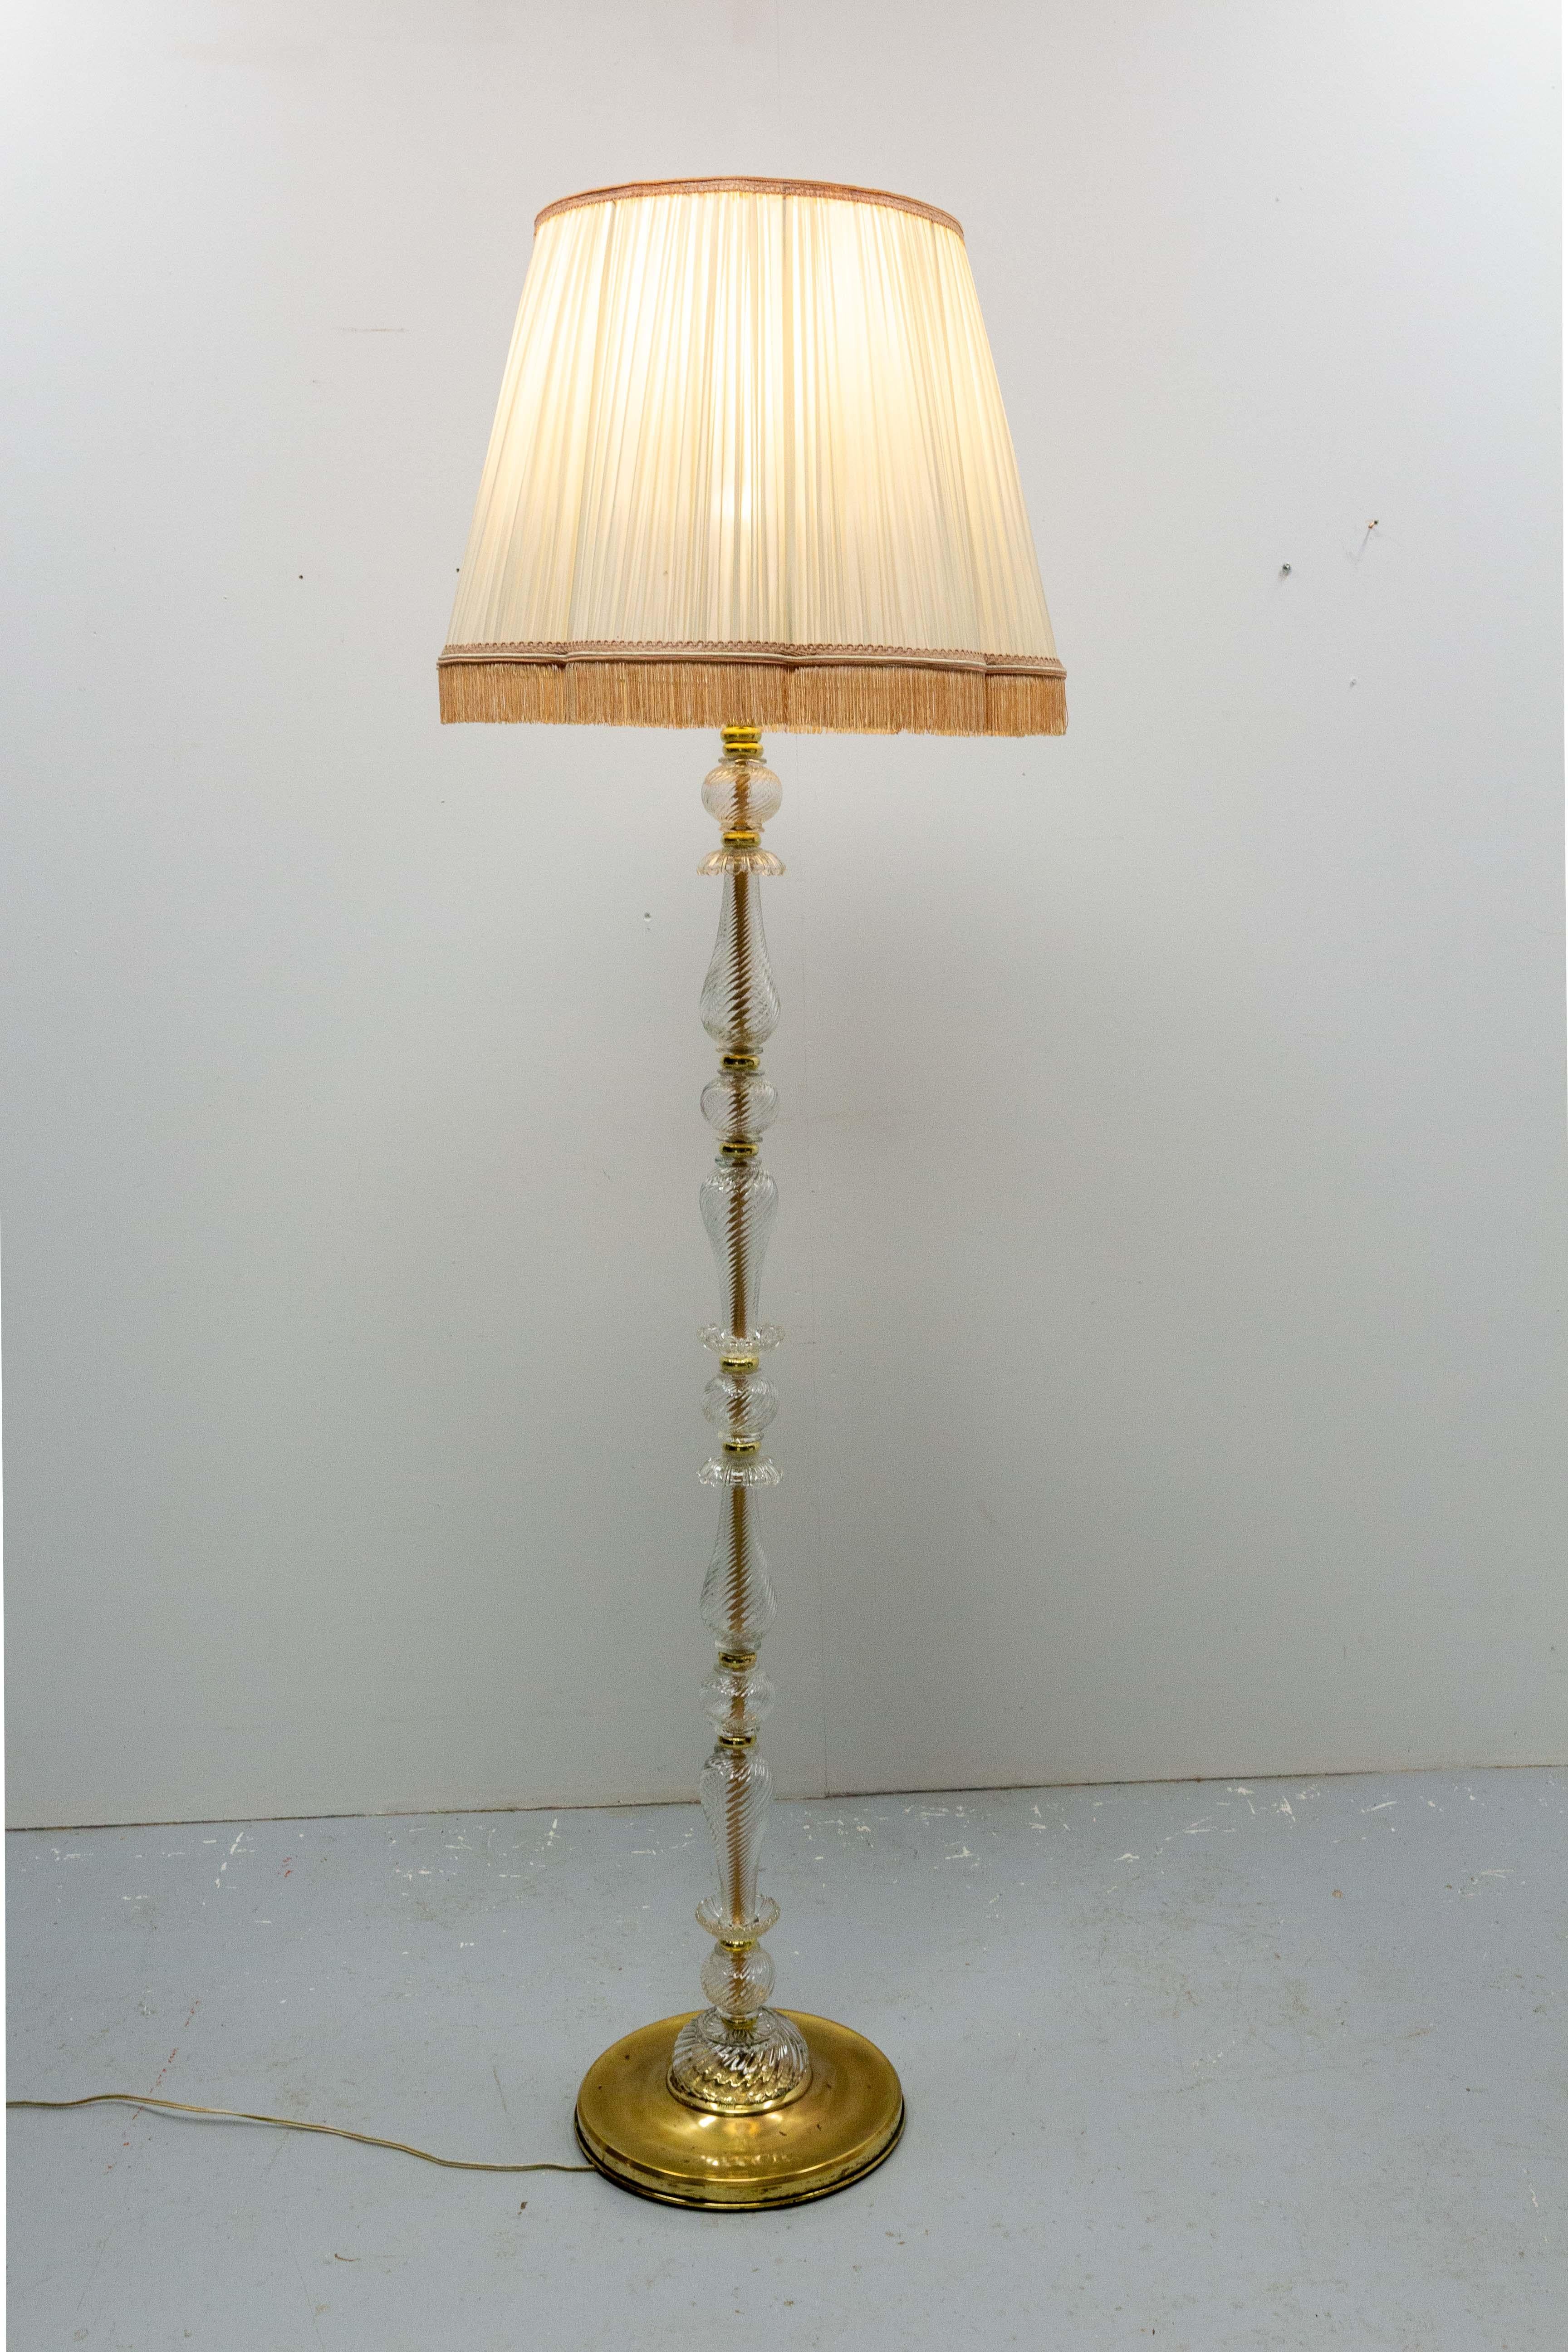 Glass & Brass Floor Lamp in the Murano Style Light Lantern, French, circa 1960 For Sale 2